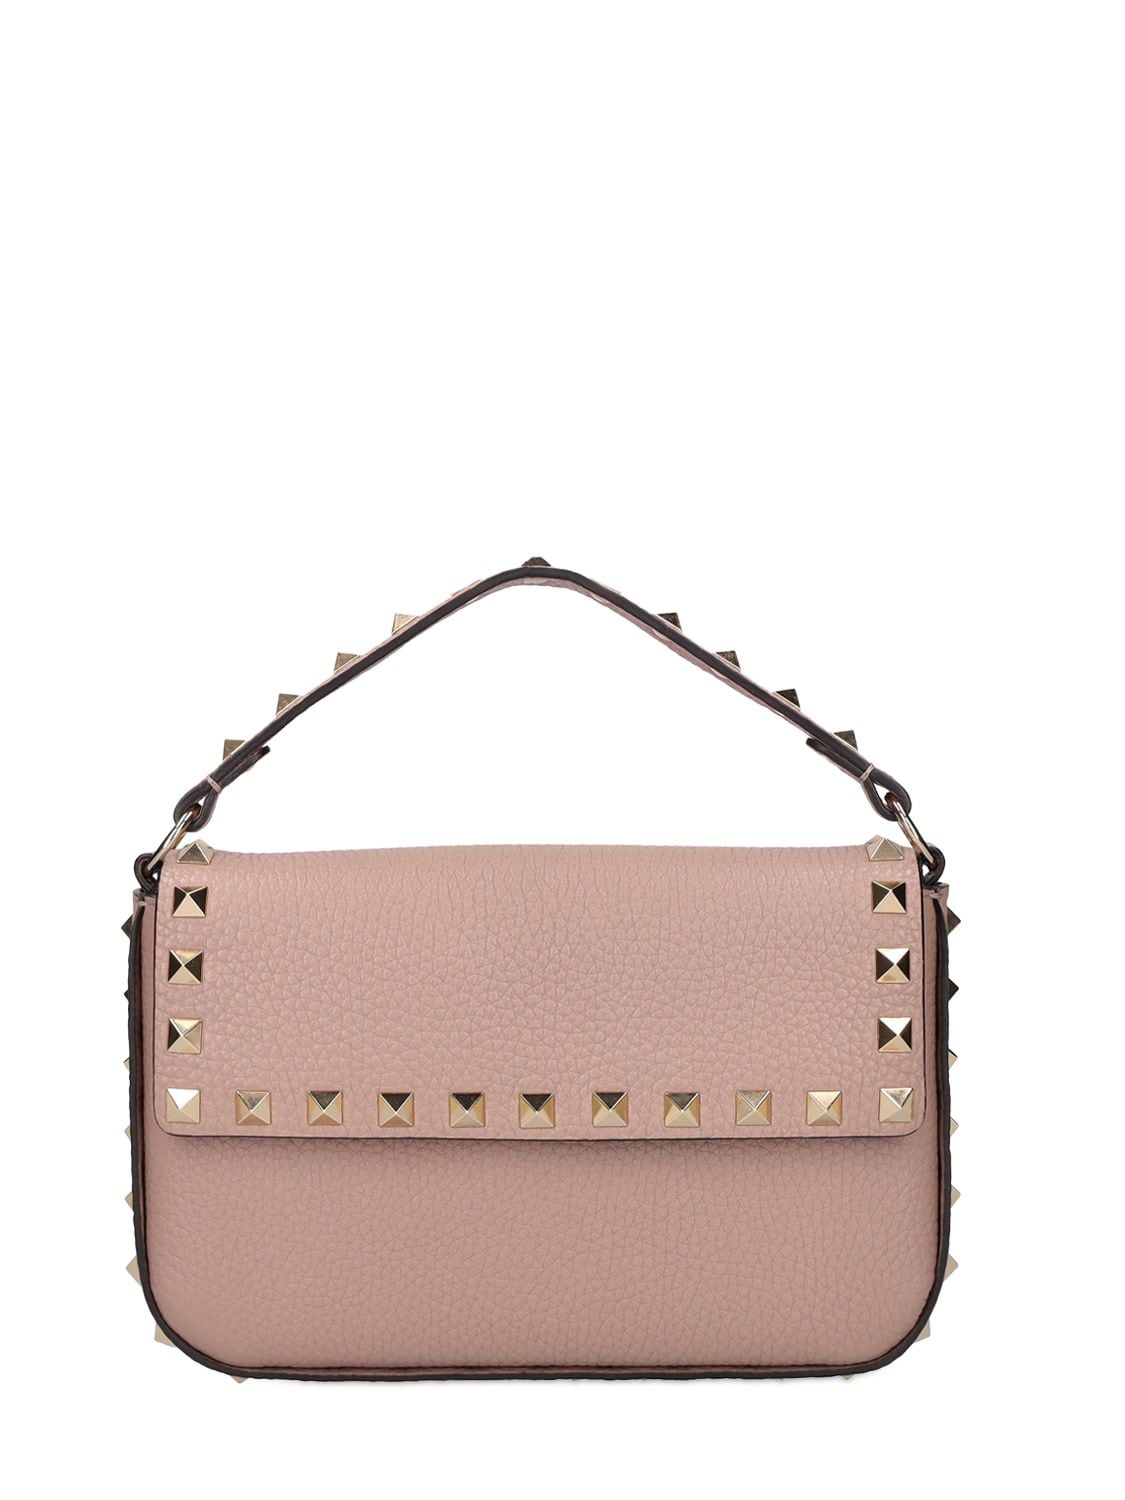 Valentino Small Leather Rockstud Top Bag In Poudre | ModeSens